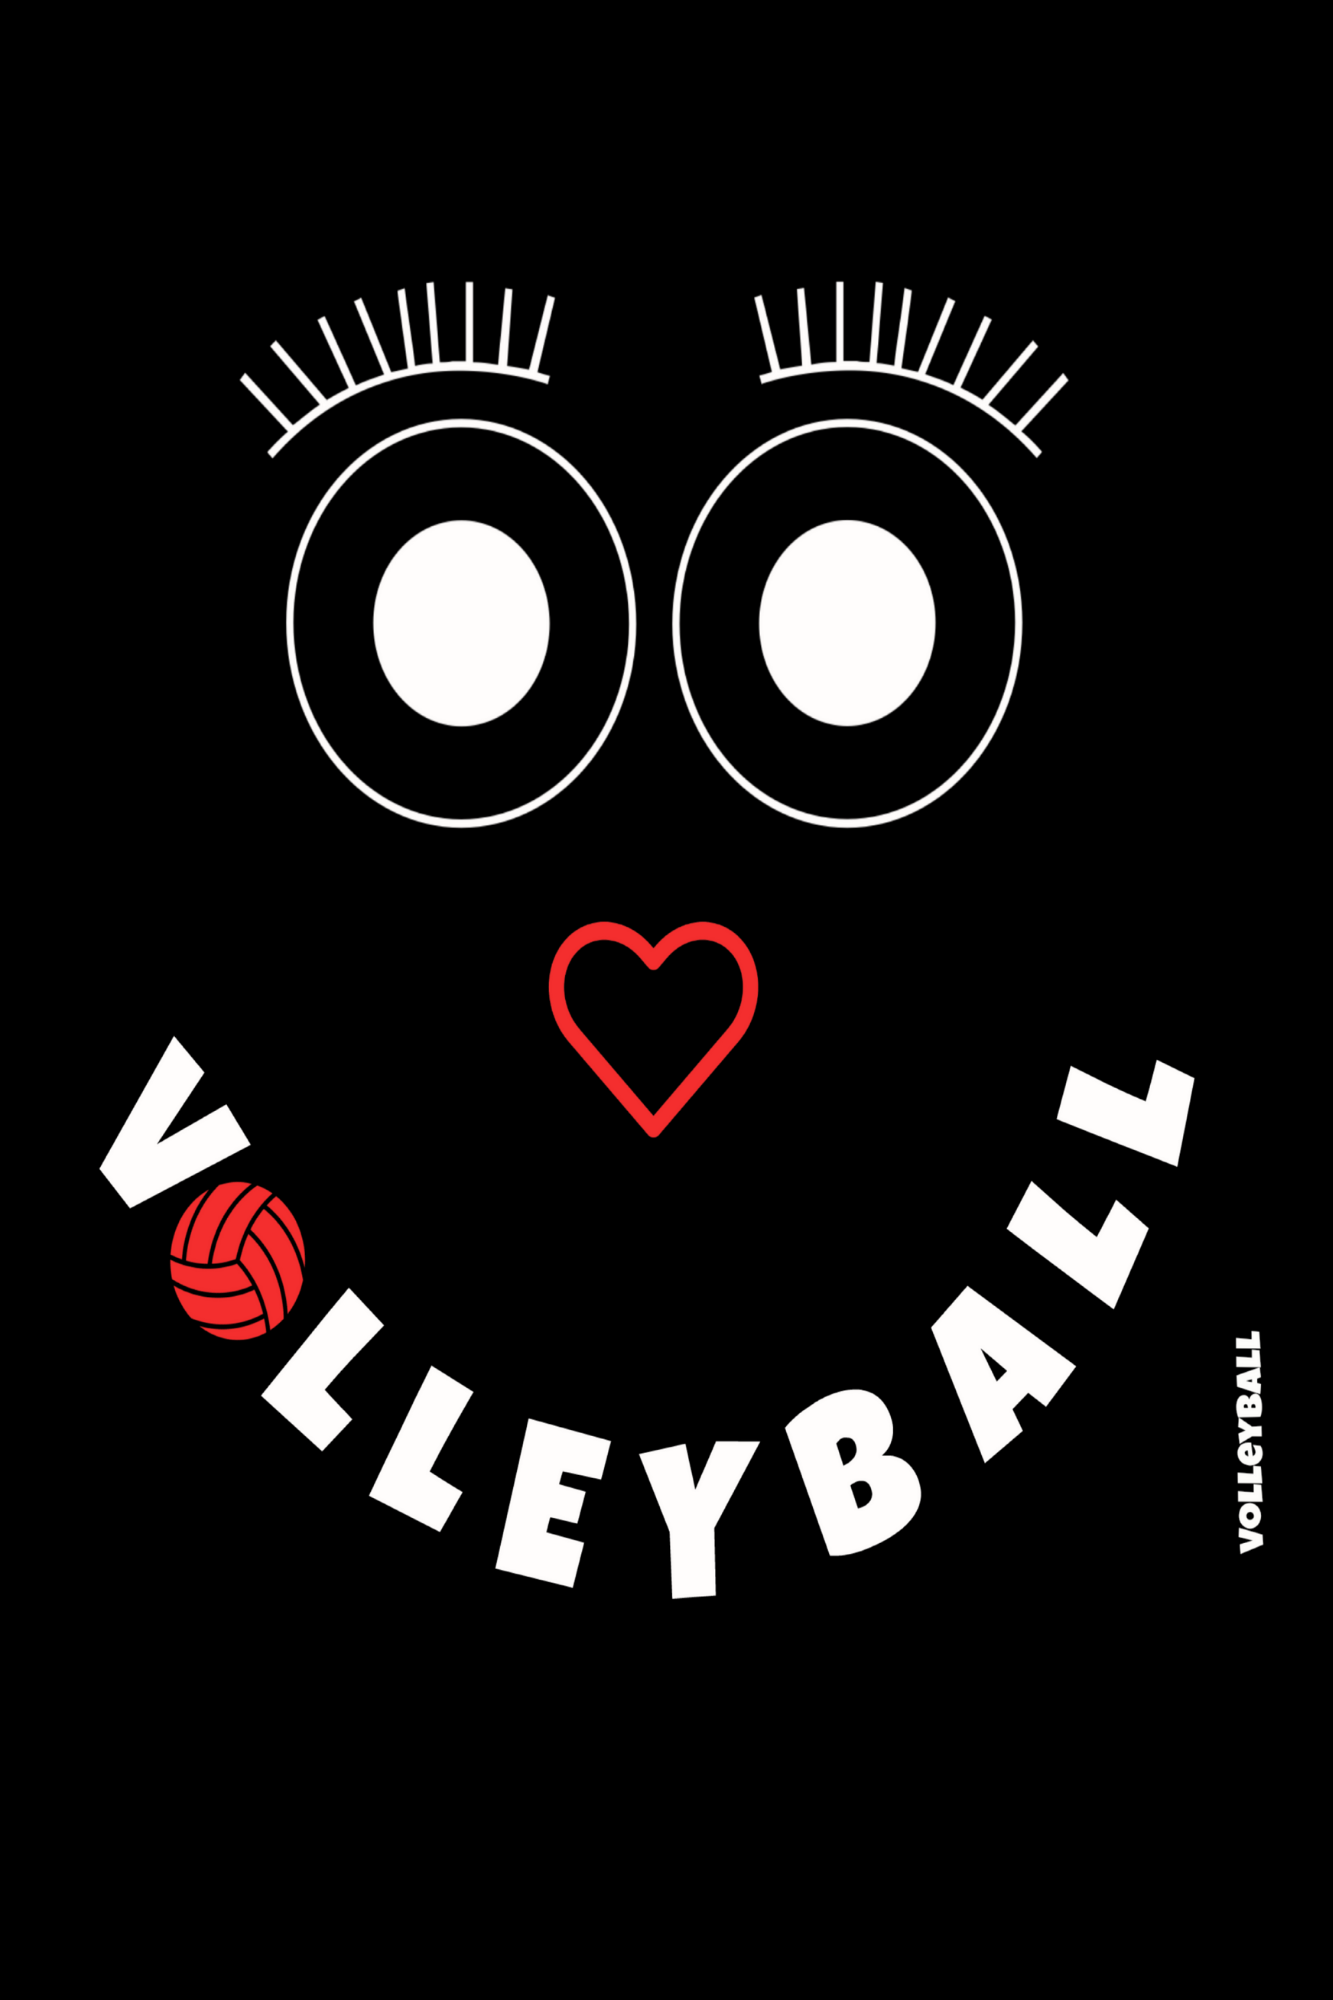 You'll love the design of these black journals that make awesome volleyball gifts for boys to use as an appreciation, gratitude and/or volleyball journal to record daily volleyball life.